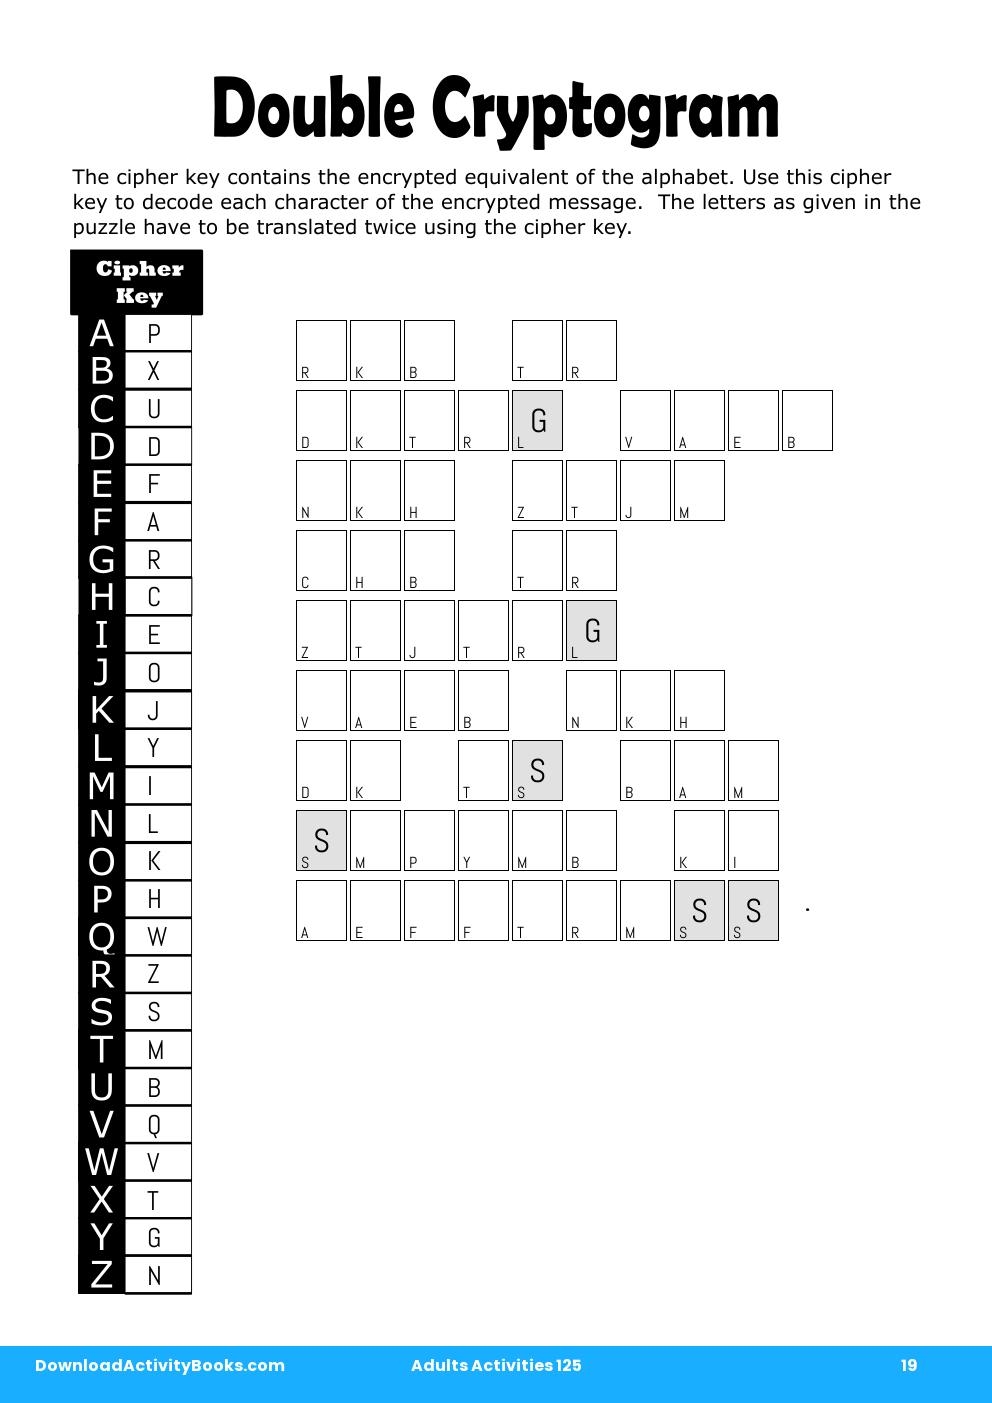 Double Cryptogram in Adults Activities 125